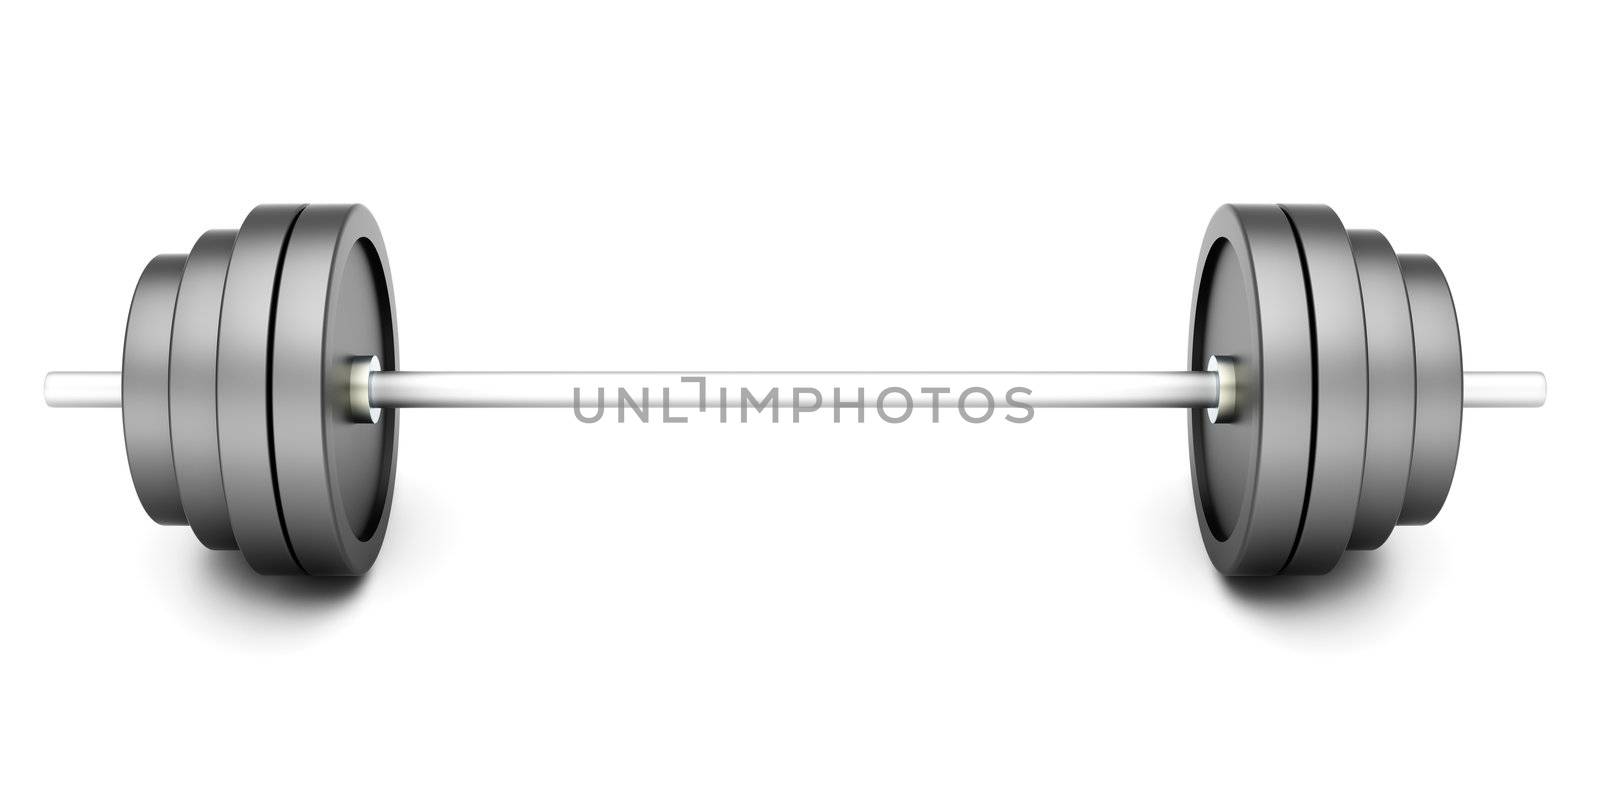 Weights for Sports and Body building. 3D rendered Illustration. Isolated on white.